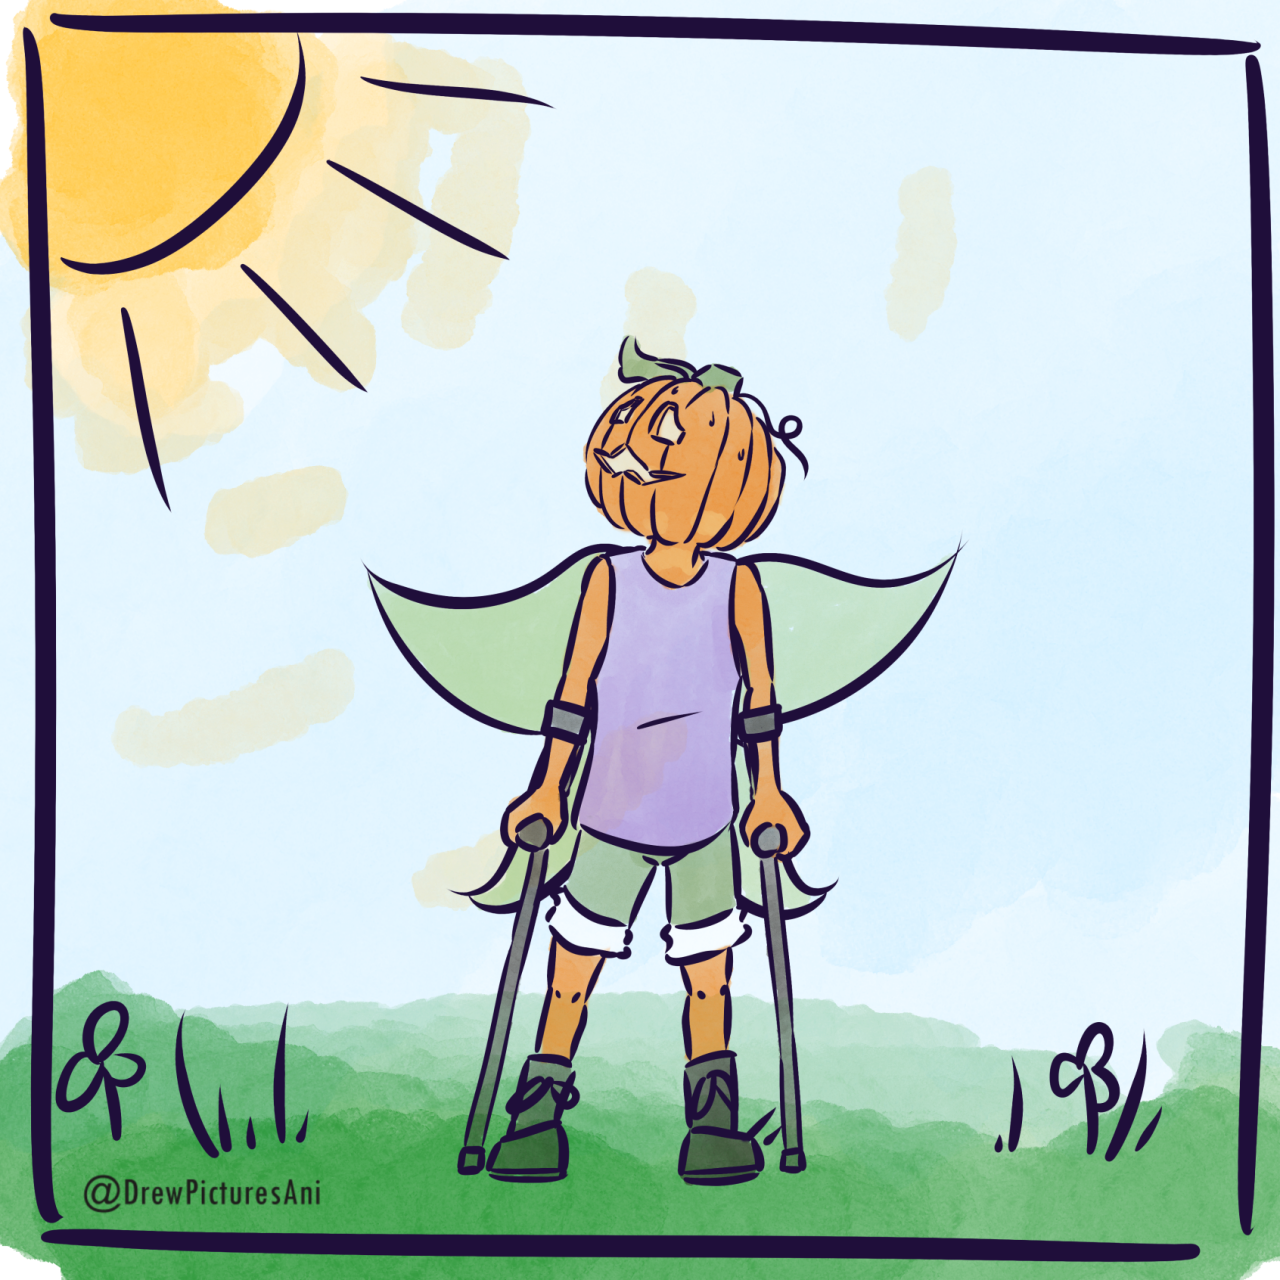 Panel 3. The faerie stops in the centre of the panel and looks up towards the sun, a concerned expression on their face. They are still sweating.